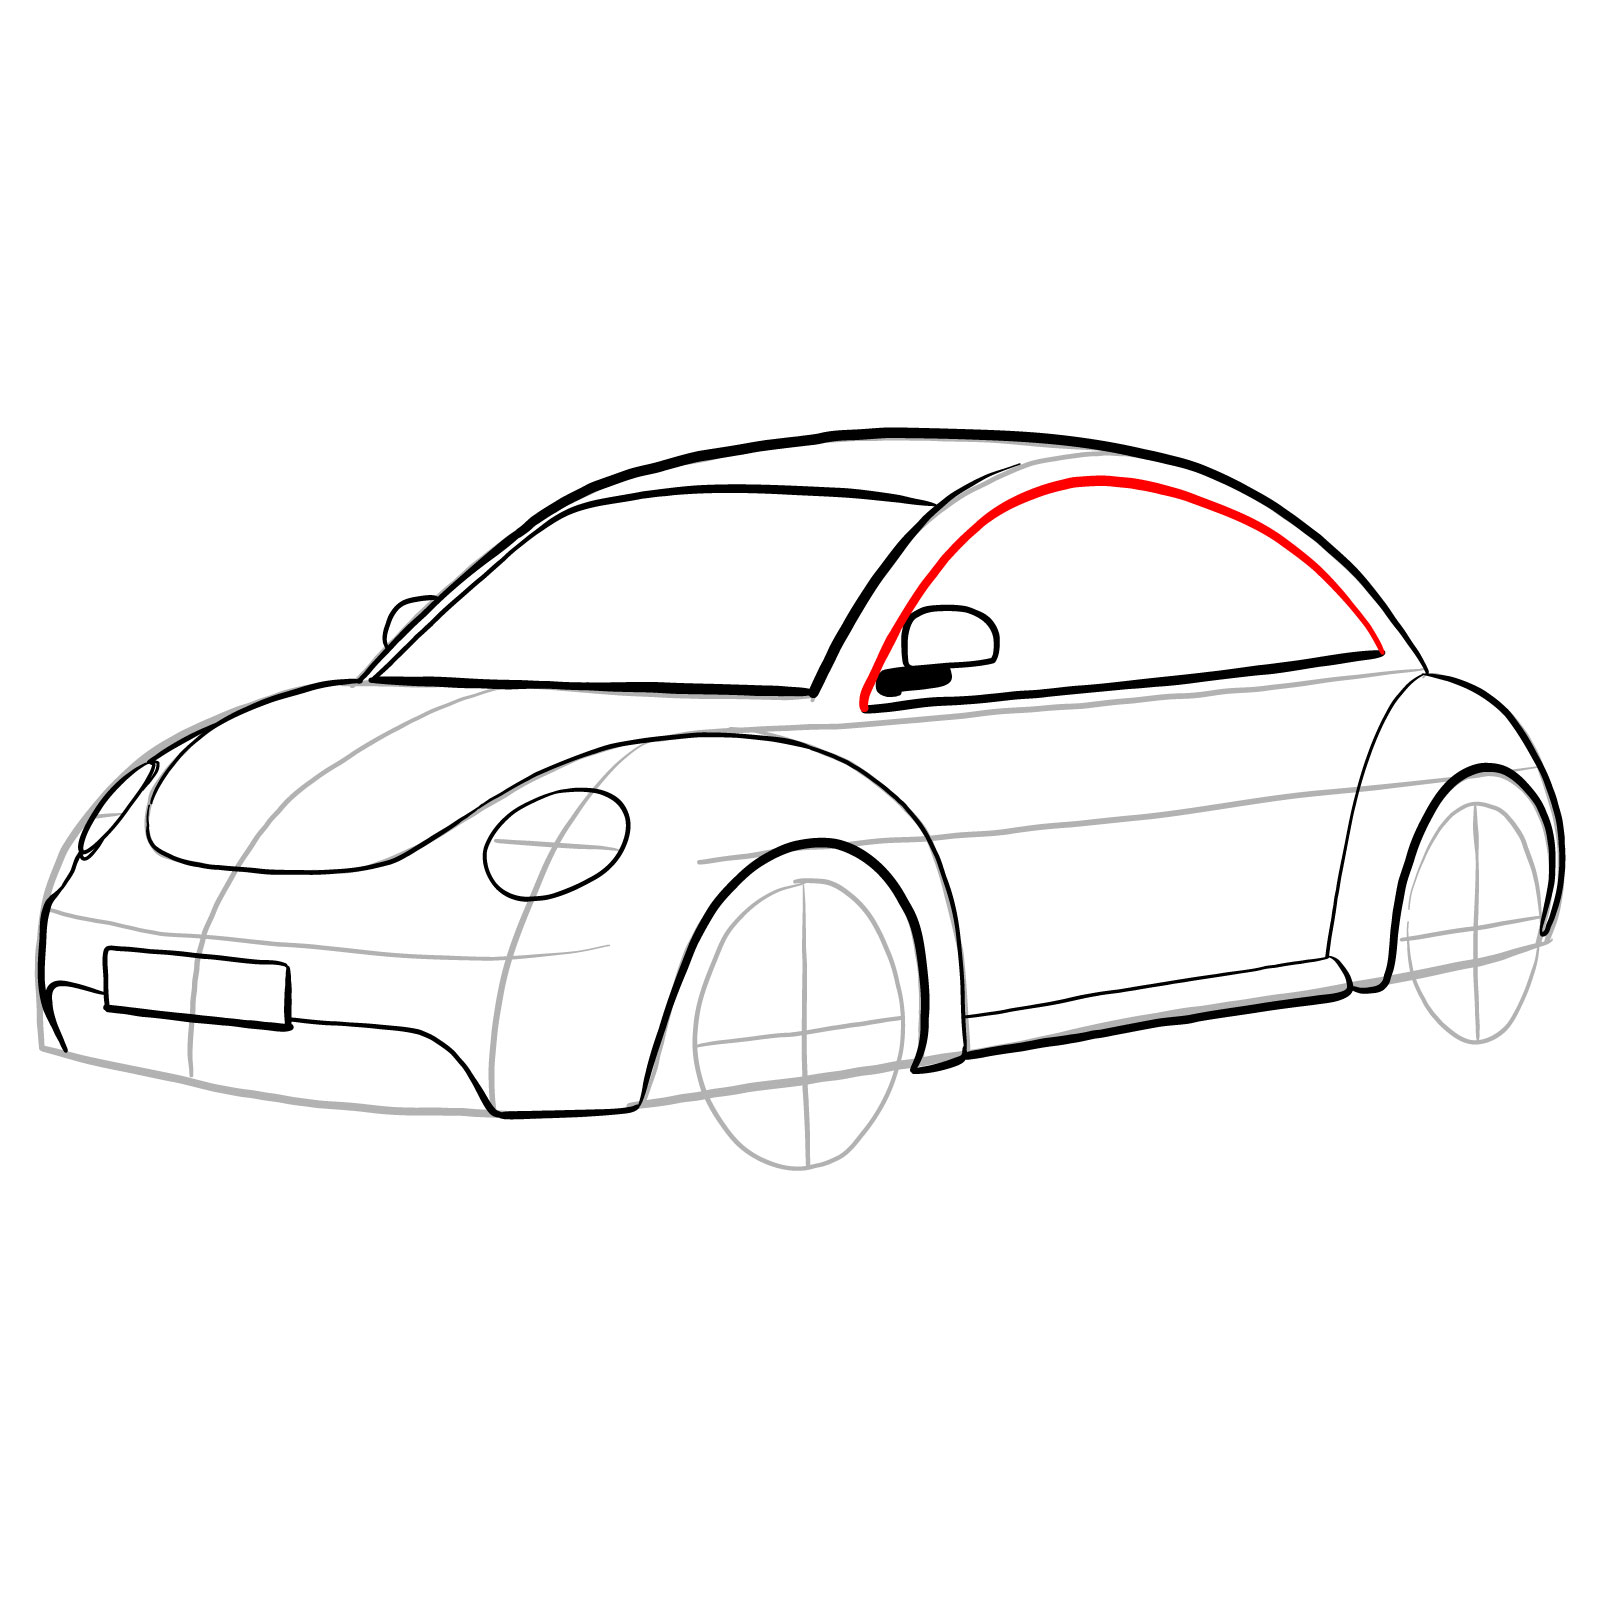 How to draw Volkswagen New Beetle - step 18